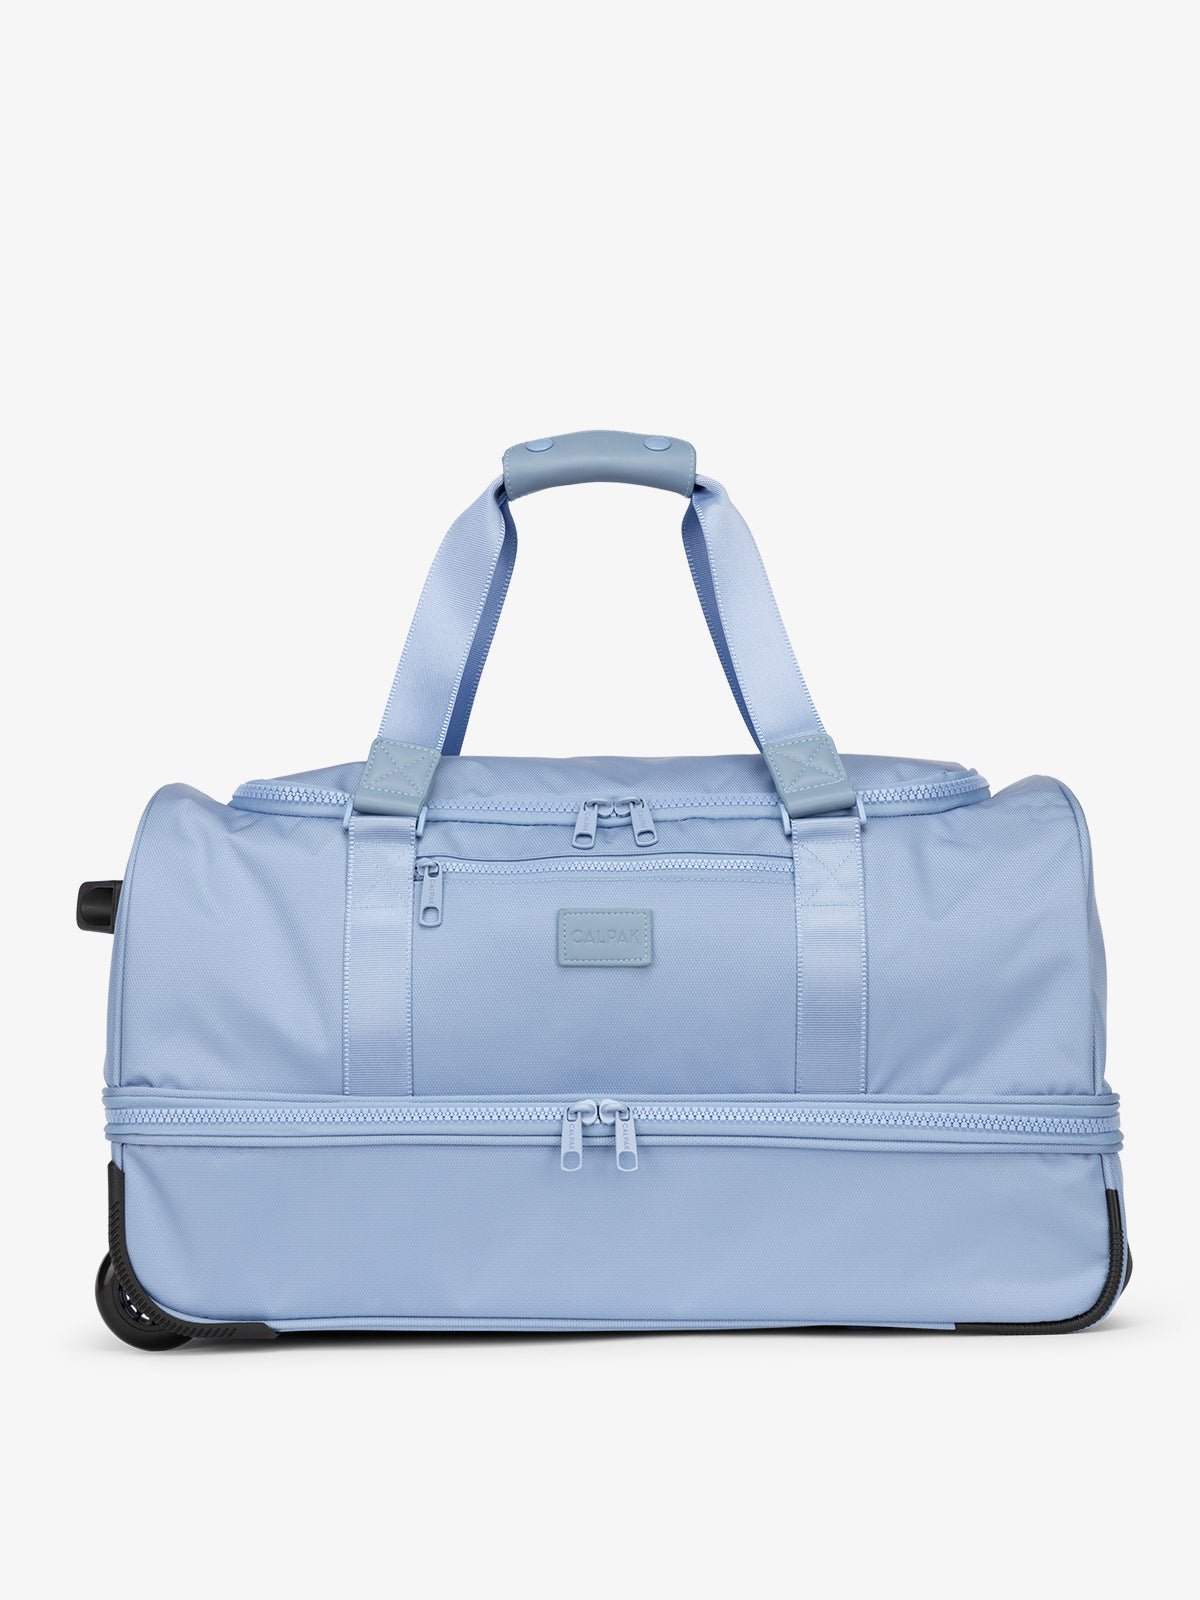 CALPAK Stevyn Rolling Duffel bag with dual top handles and shoe compartment in sky blue